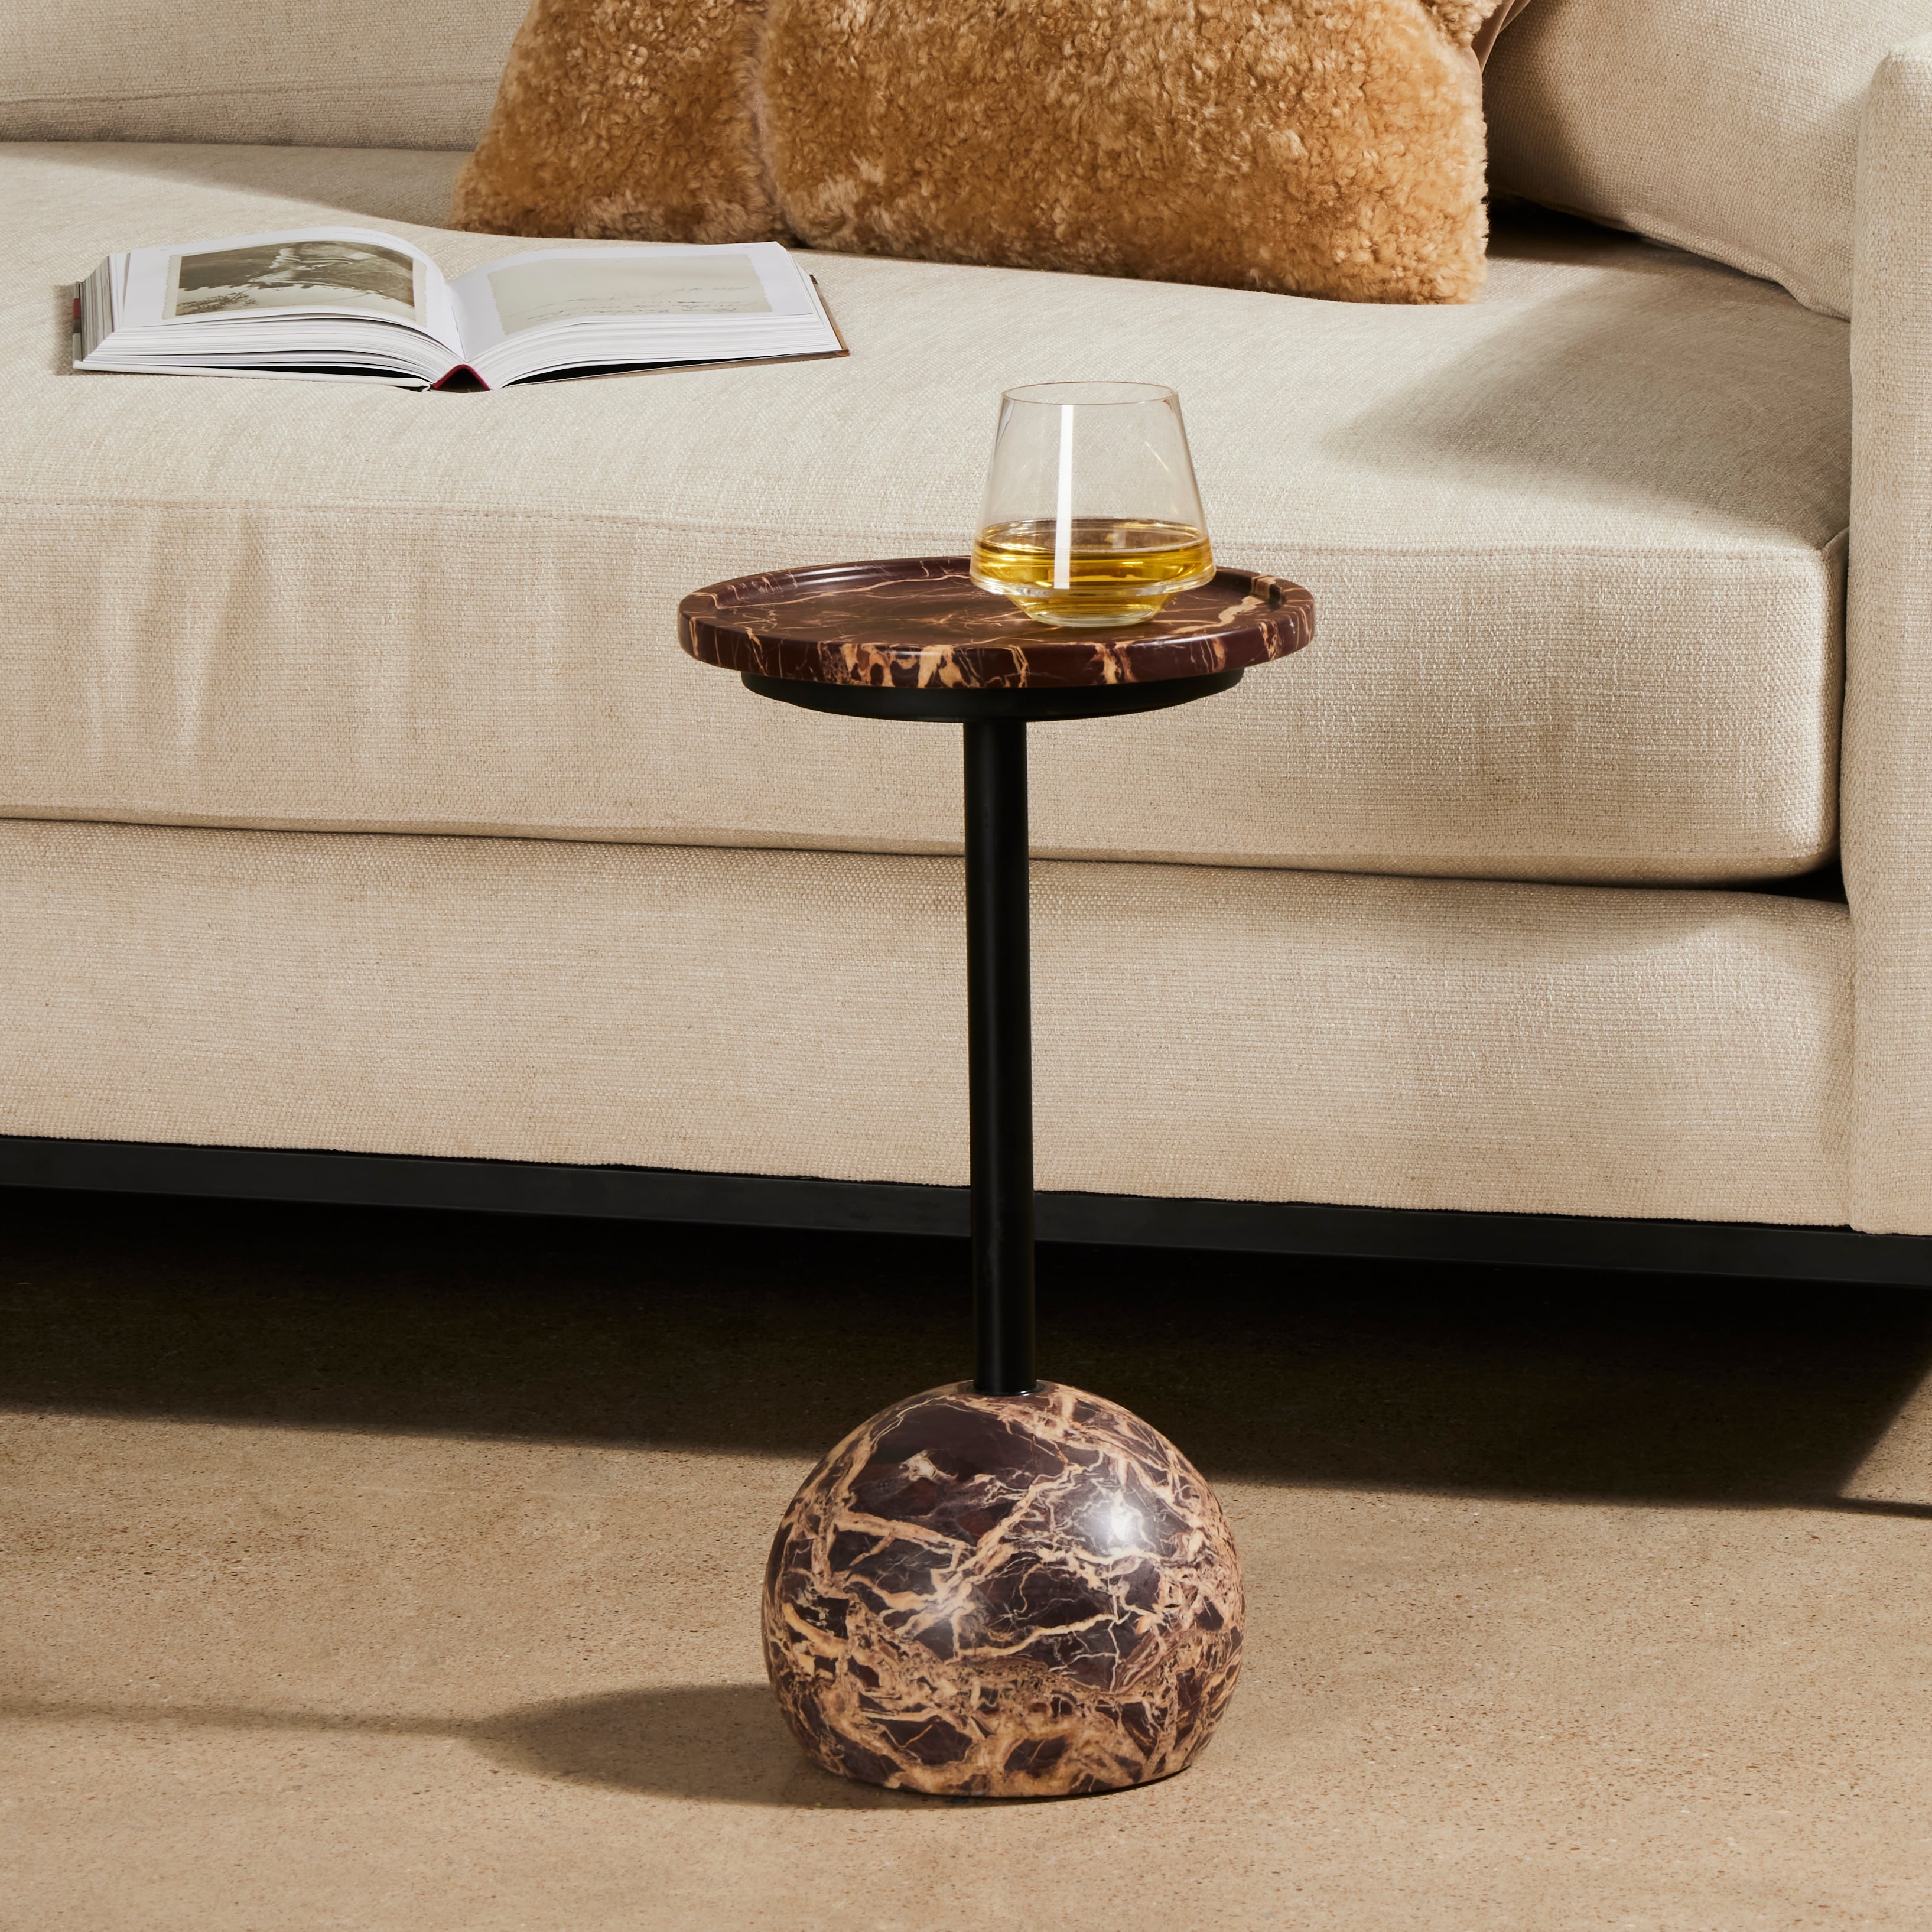 The Viola Merlot Marble Accent Table is a stylish and practical accessory for any living room. The marble tabletop and sturdy steel frame ensures durability, while the contemporary design will make a great addition to any décor. Enjoy the natural beauty of the marble table top as it enhances any space. Amethyst Home provides interior design, new construction, custom furniture, and area rugs in the Seattle metro area.